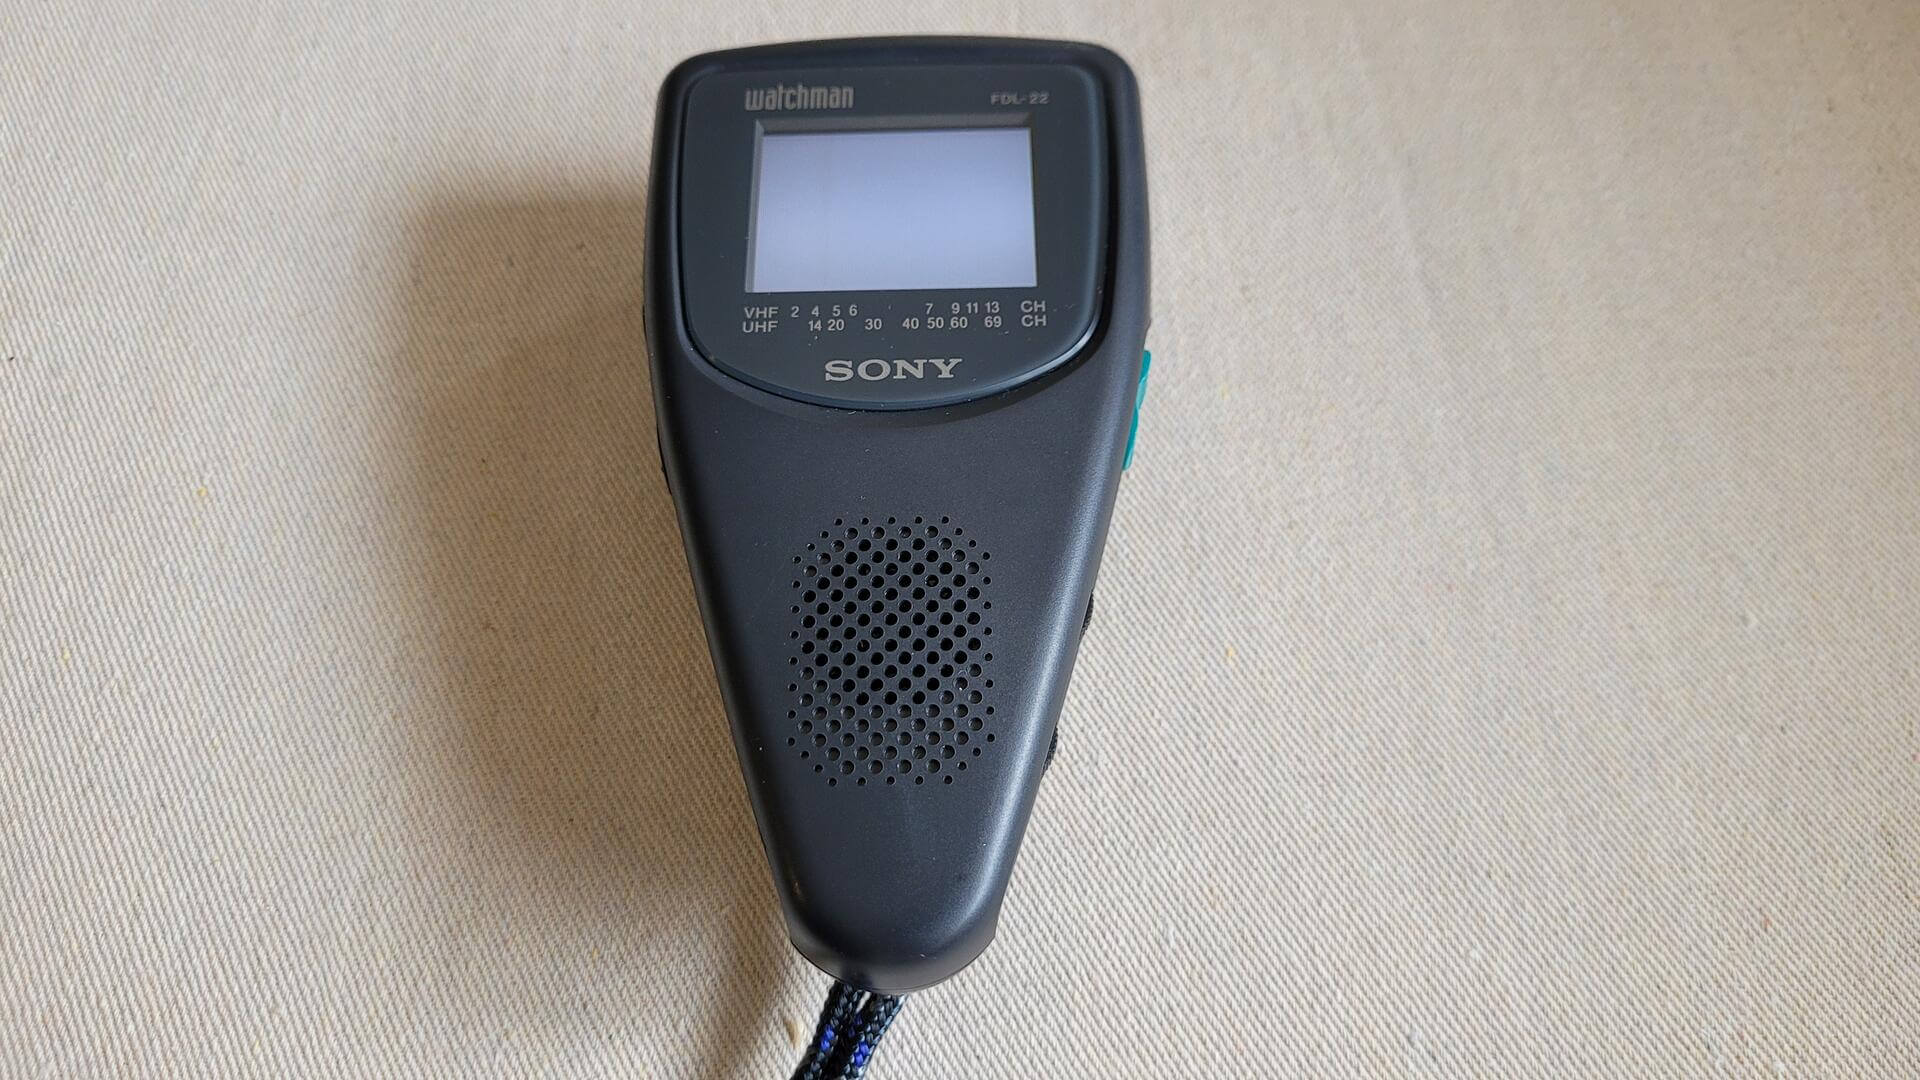 Sony Watchman FDL-22 LCD Analog mini hand held colour portable television with the strap. Vintage made in Japan collectible electronic gadgets